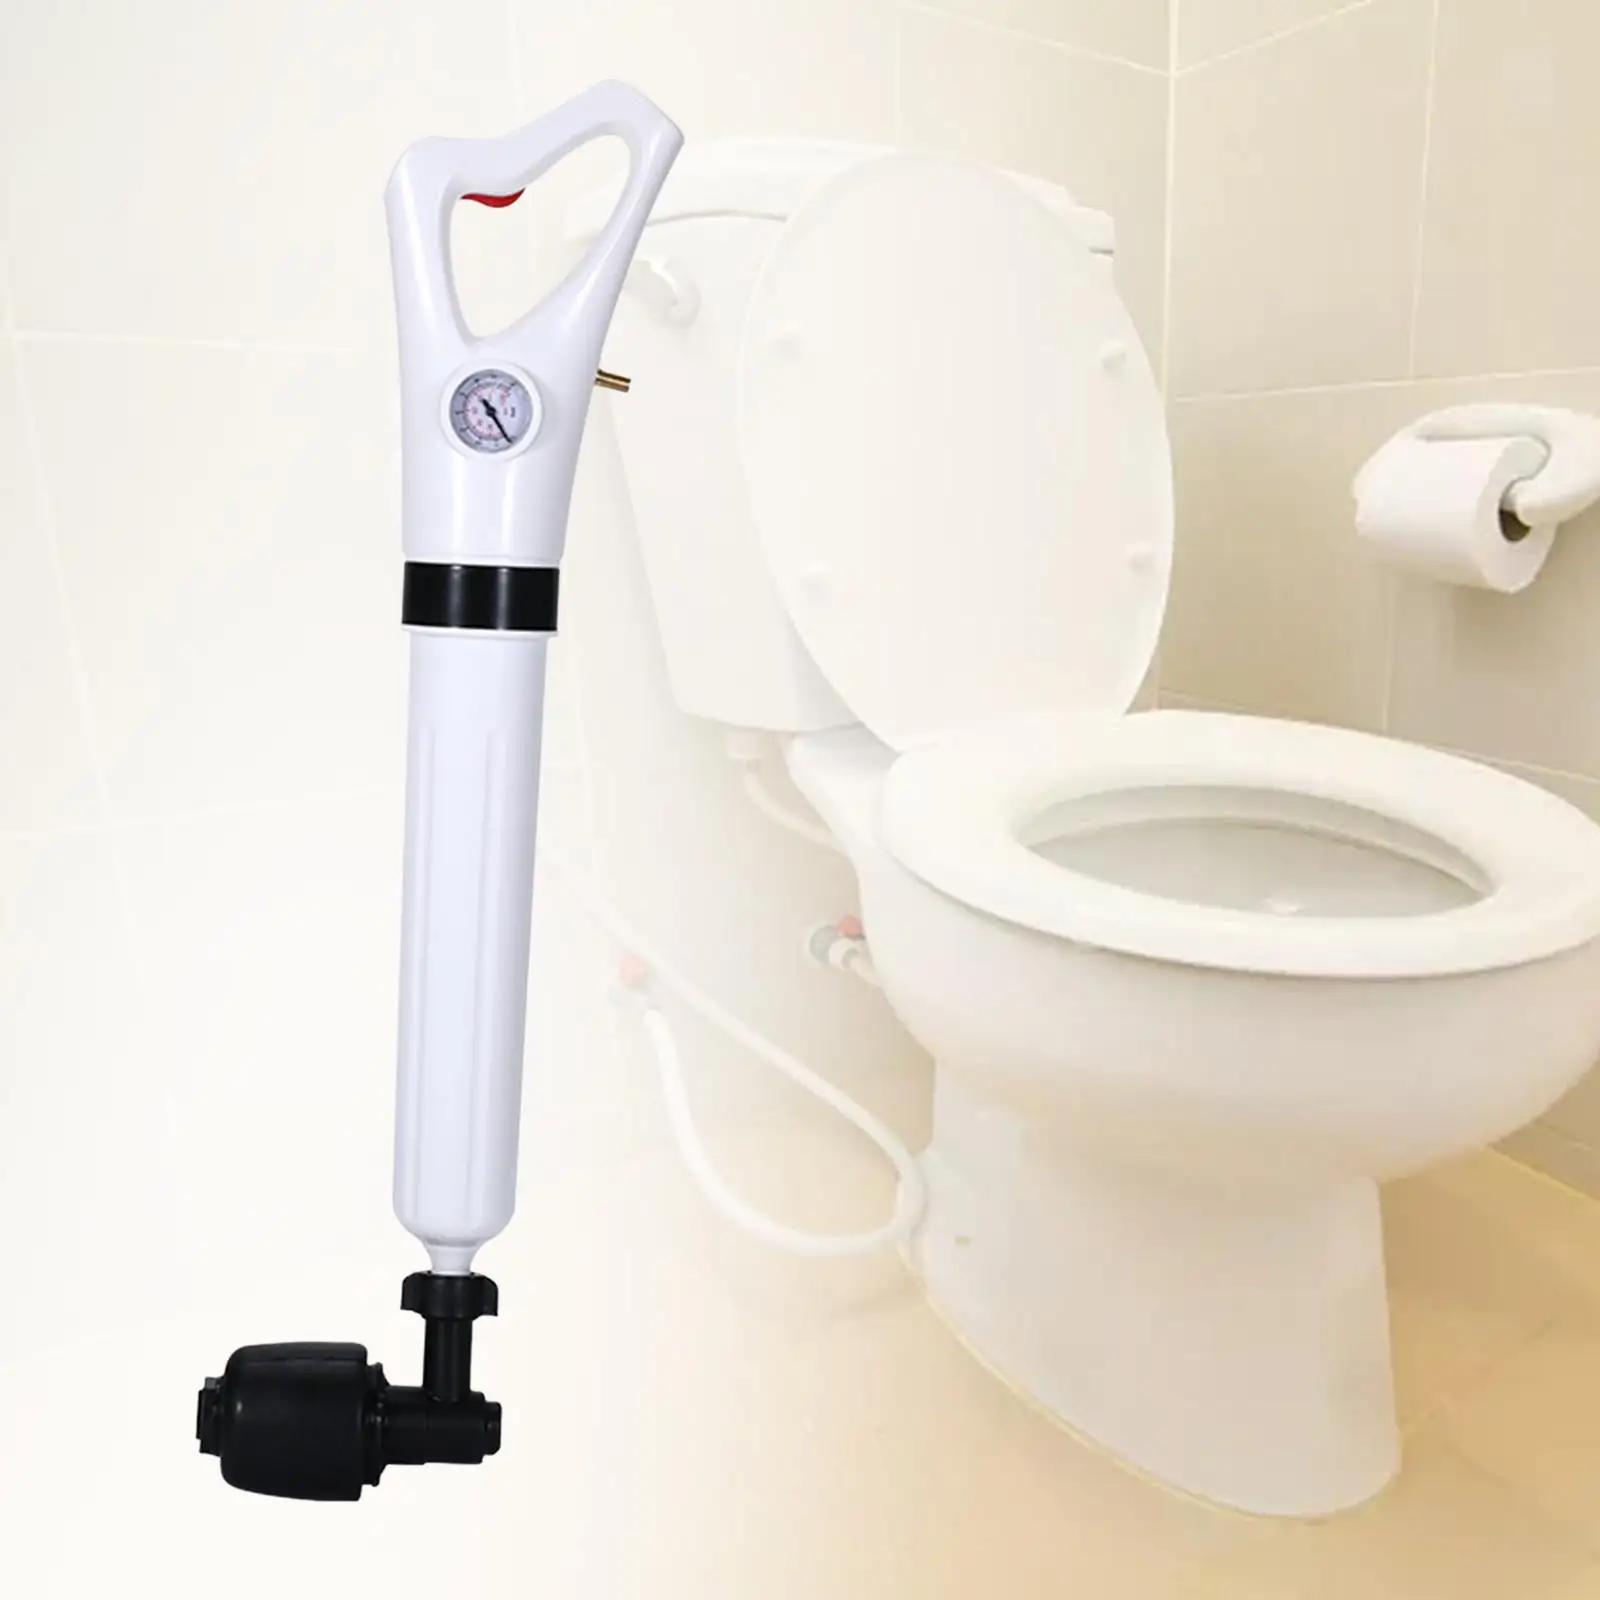 Toilet Plunger Set with Replaceable Heads, Drain Unblockers for Floor Drains Shower